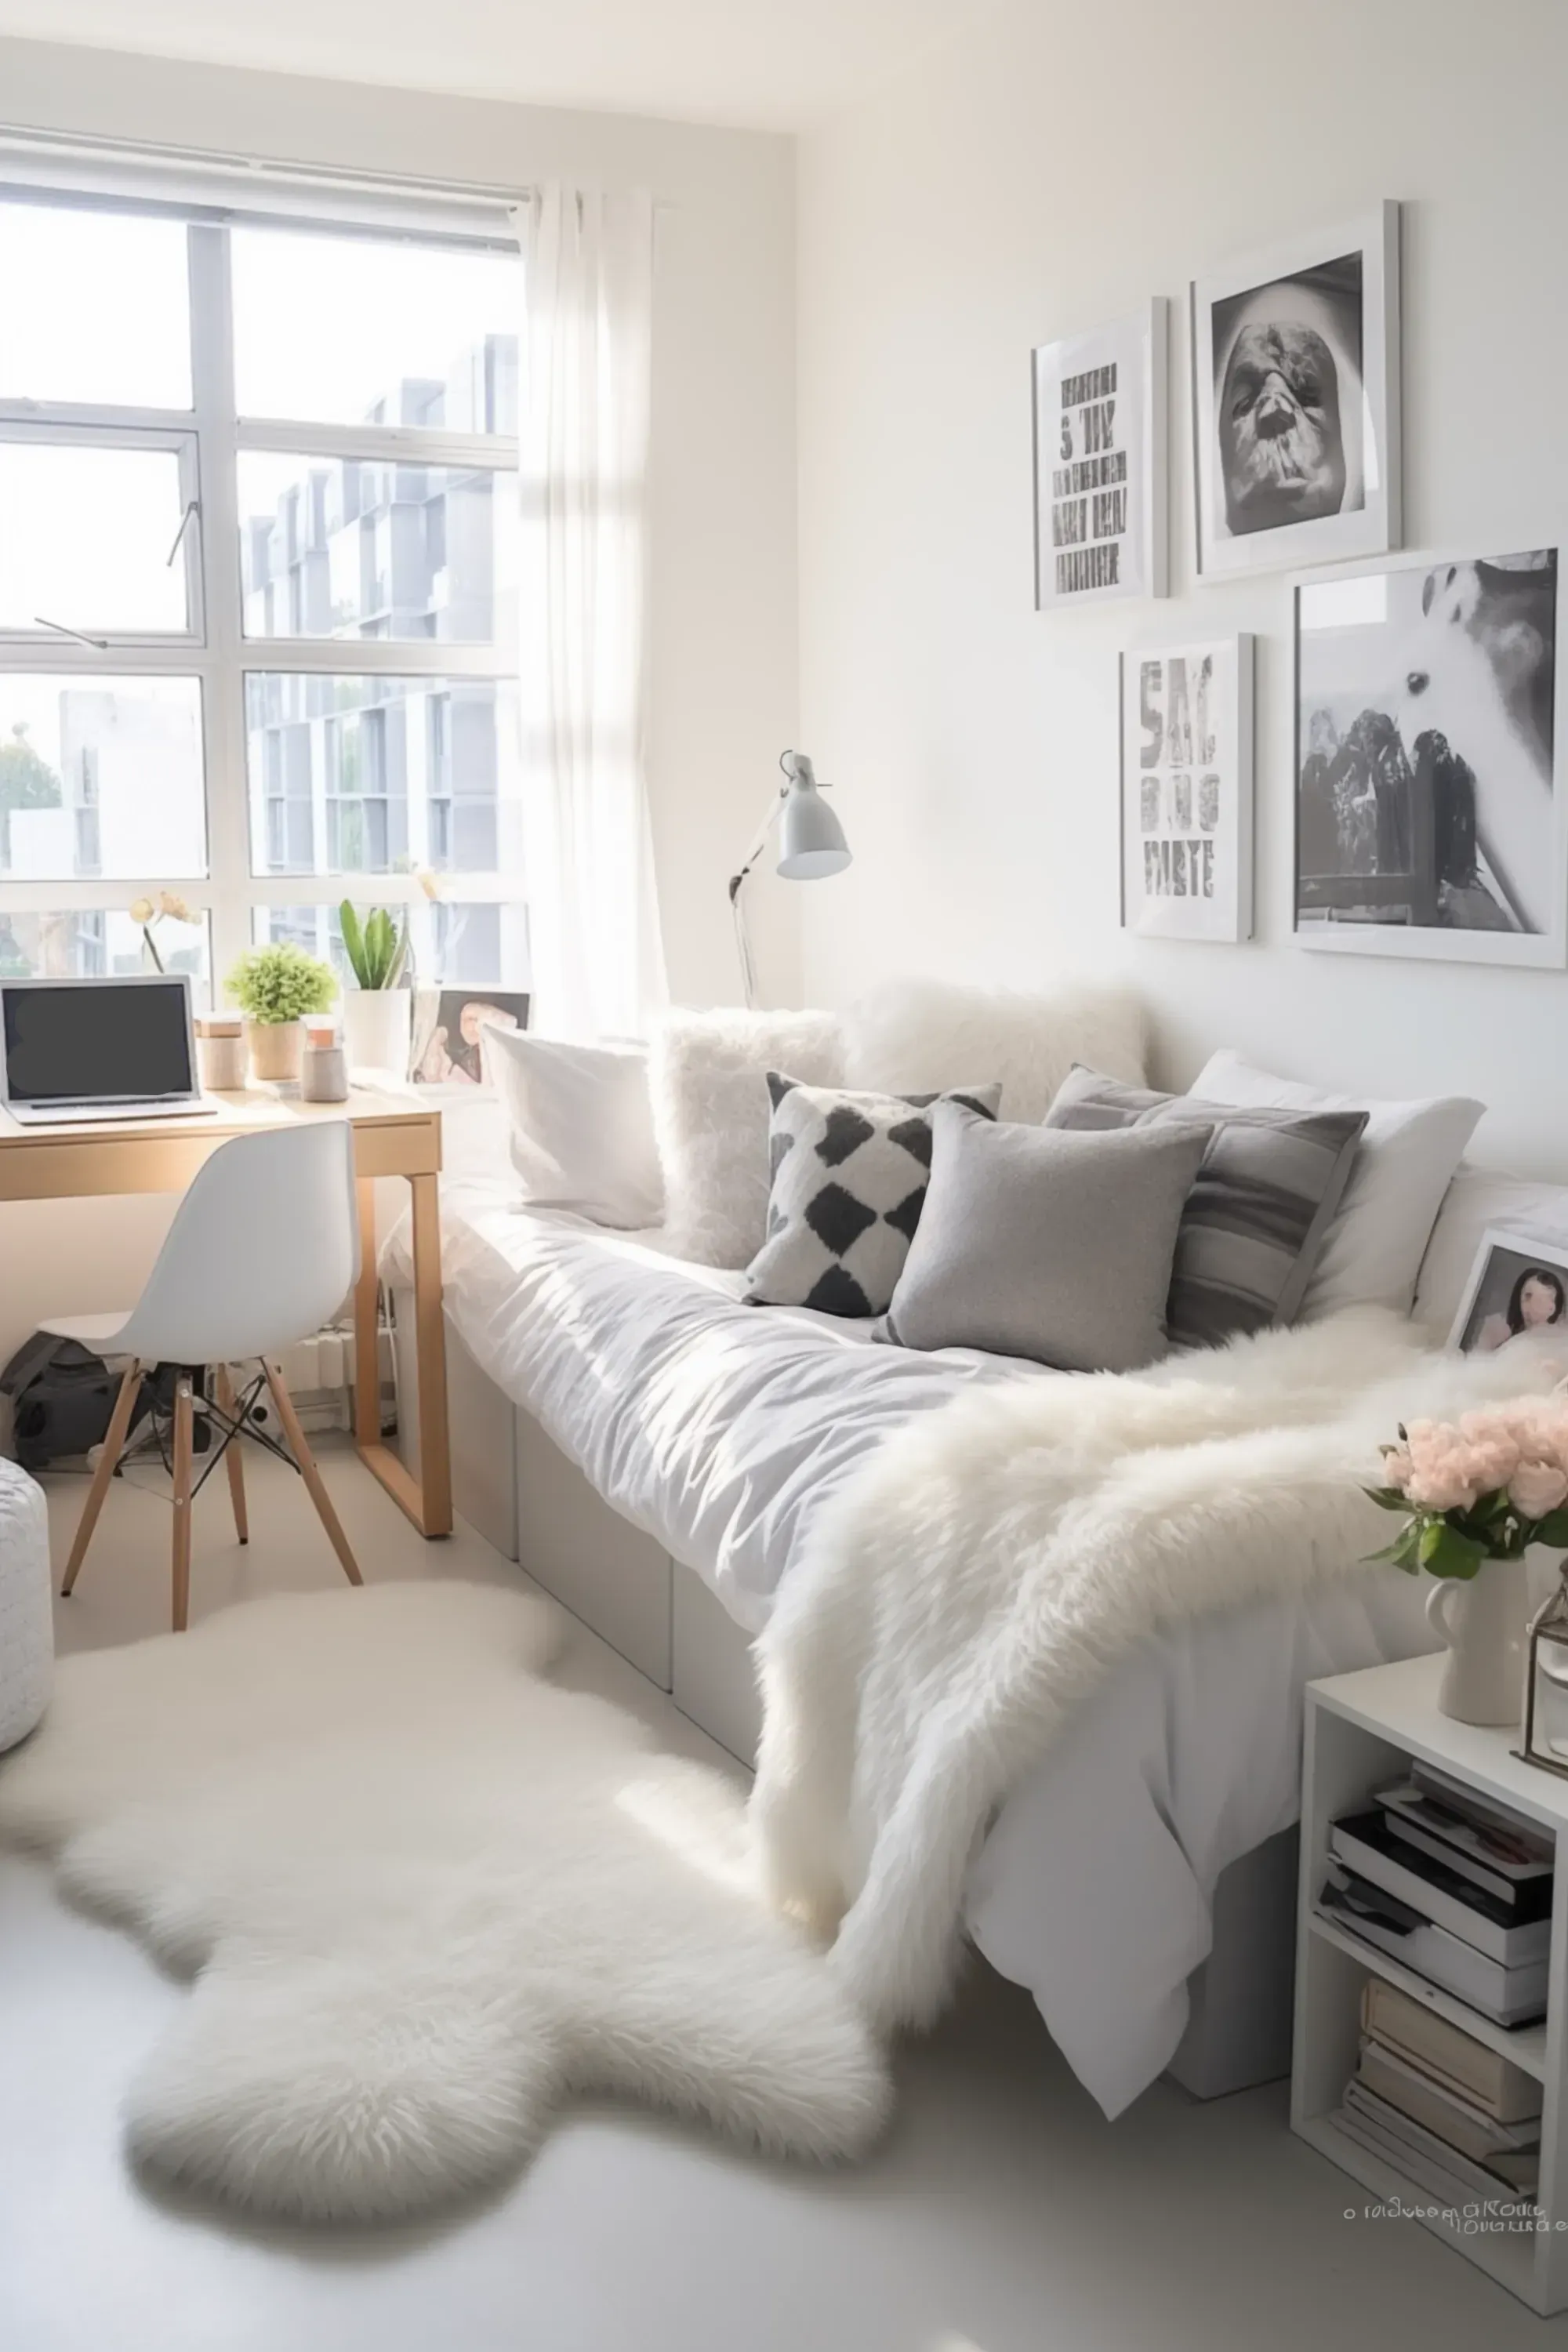 A black and white dorm bedroom with fluffy rugs and throw pillows